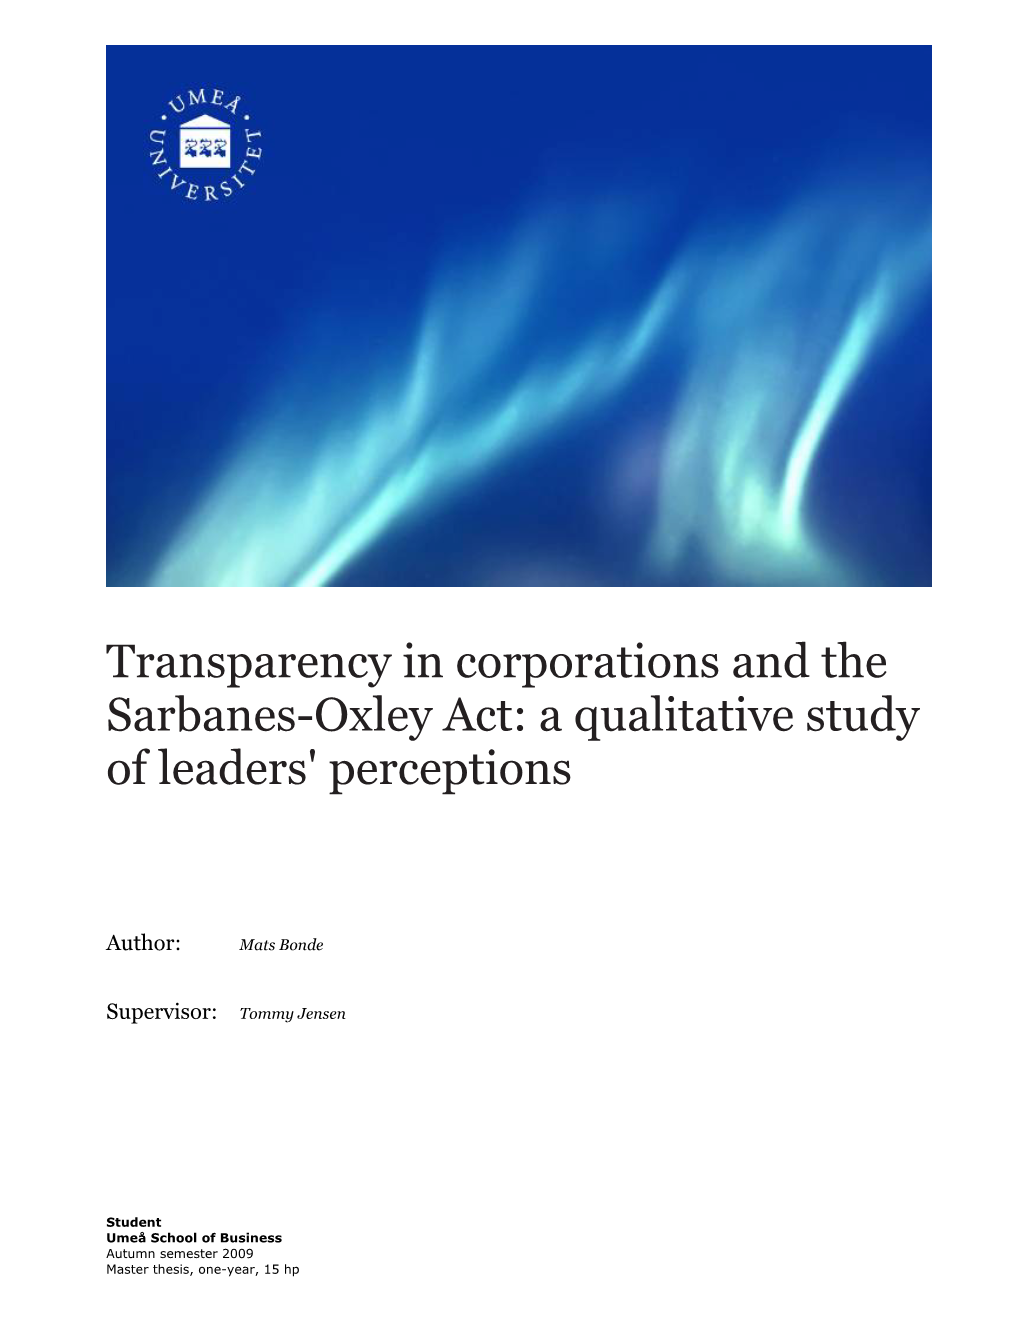 Transparency in Corporations and the Sarbanes-Oxley Act: a Qualitative Study of Leaders' Perceptions